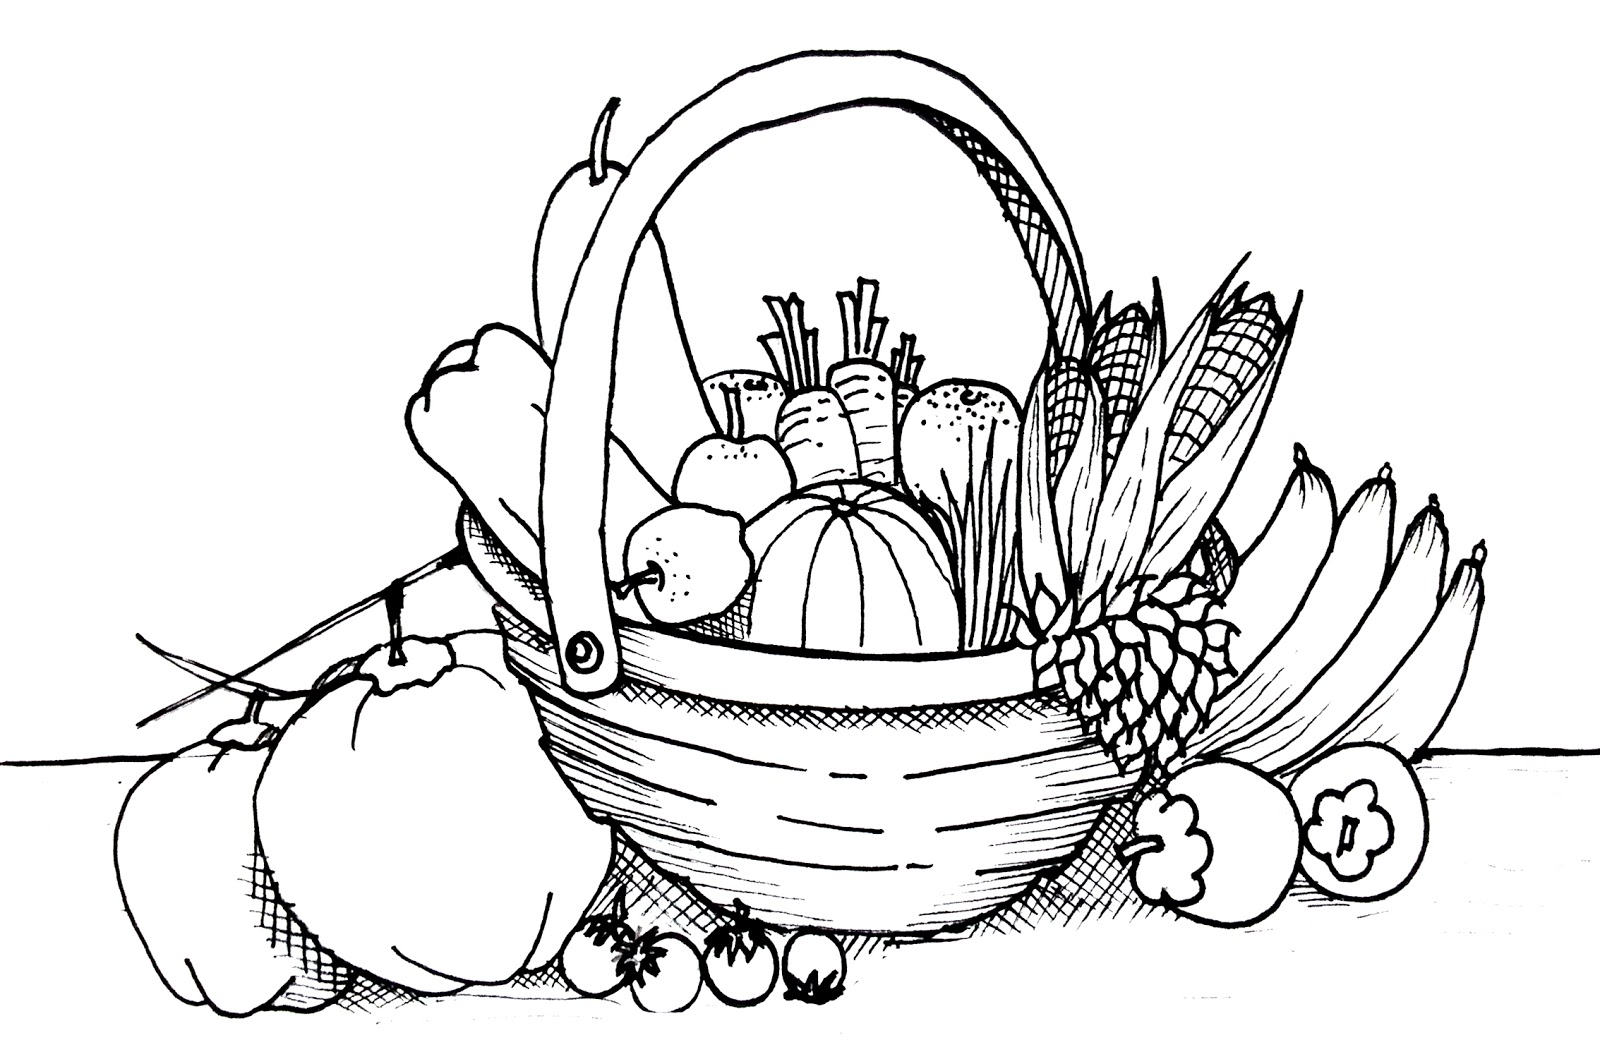 Vegetable Coloring Pages - Best Coloring Pages For Kids